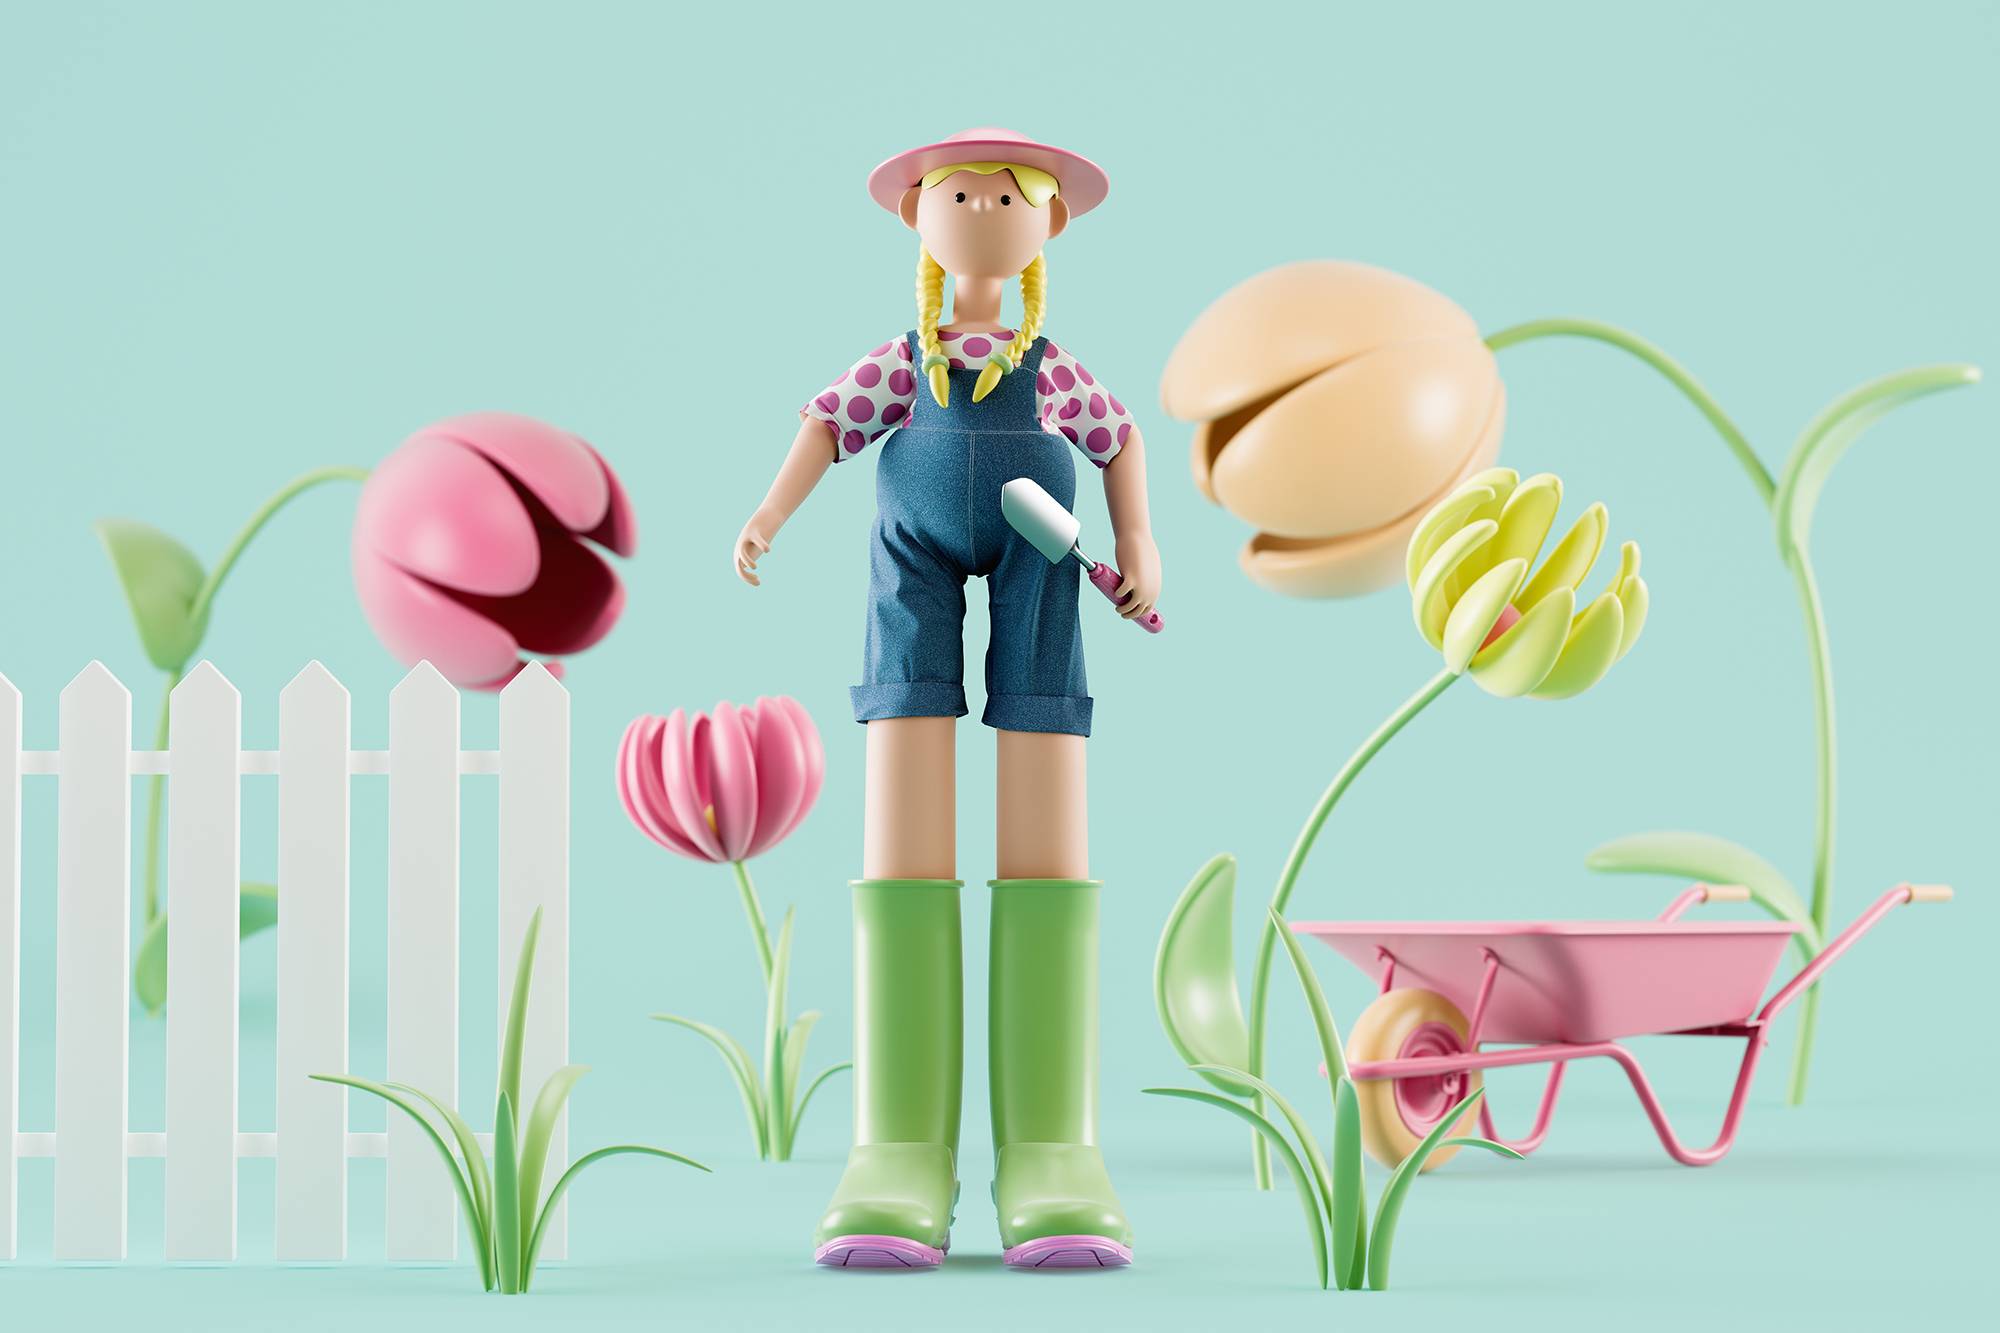 3D stylized woman cartoon character with blonde braids, no mouth, short dungarees and giant rubber boots standing in her garden. She has a tiny shovel and a wheelbarrow and is ready for the hard work. 3d illustration, 3d rendering